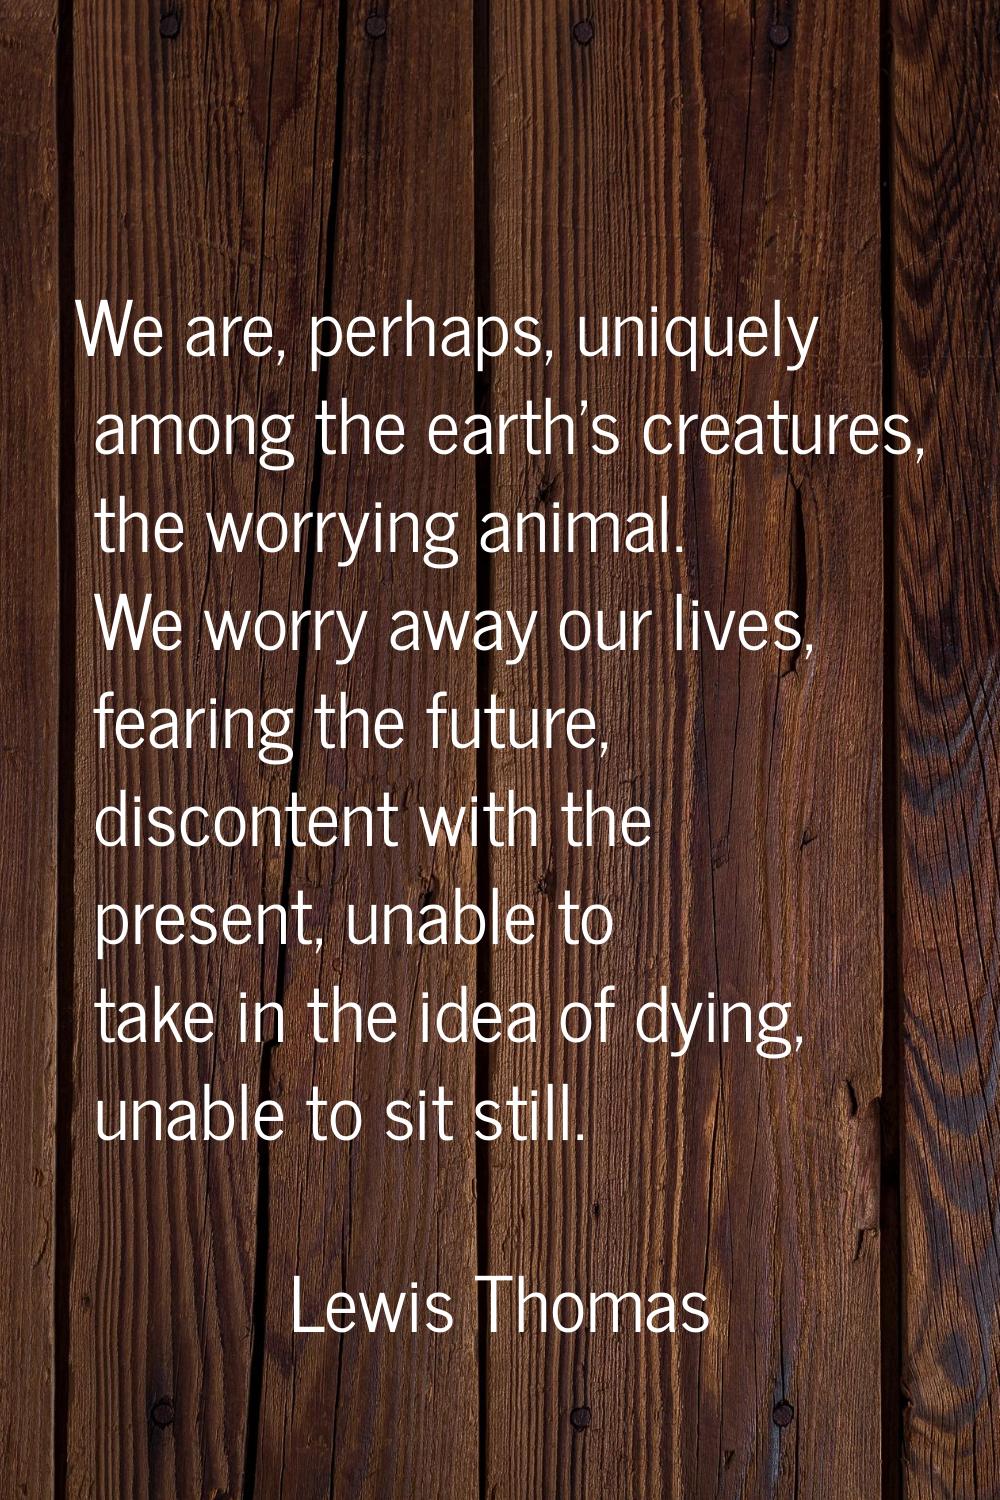 We are, perhaps, uniquely among the earth's creatures, the worrying animal. We worry away our lives